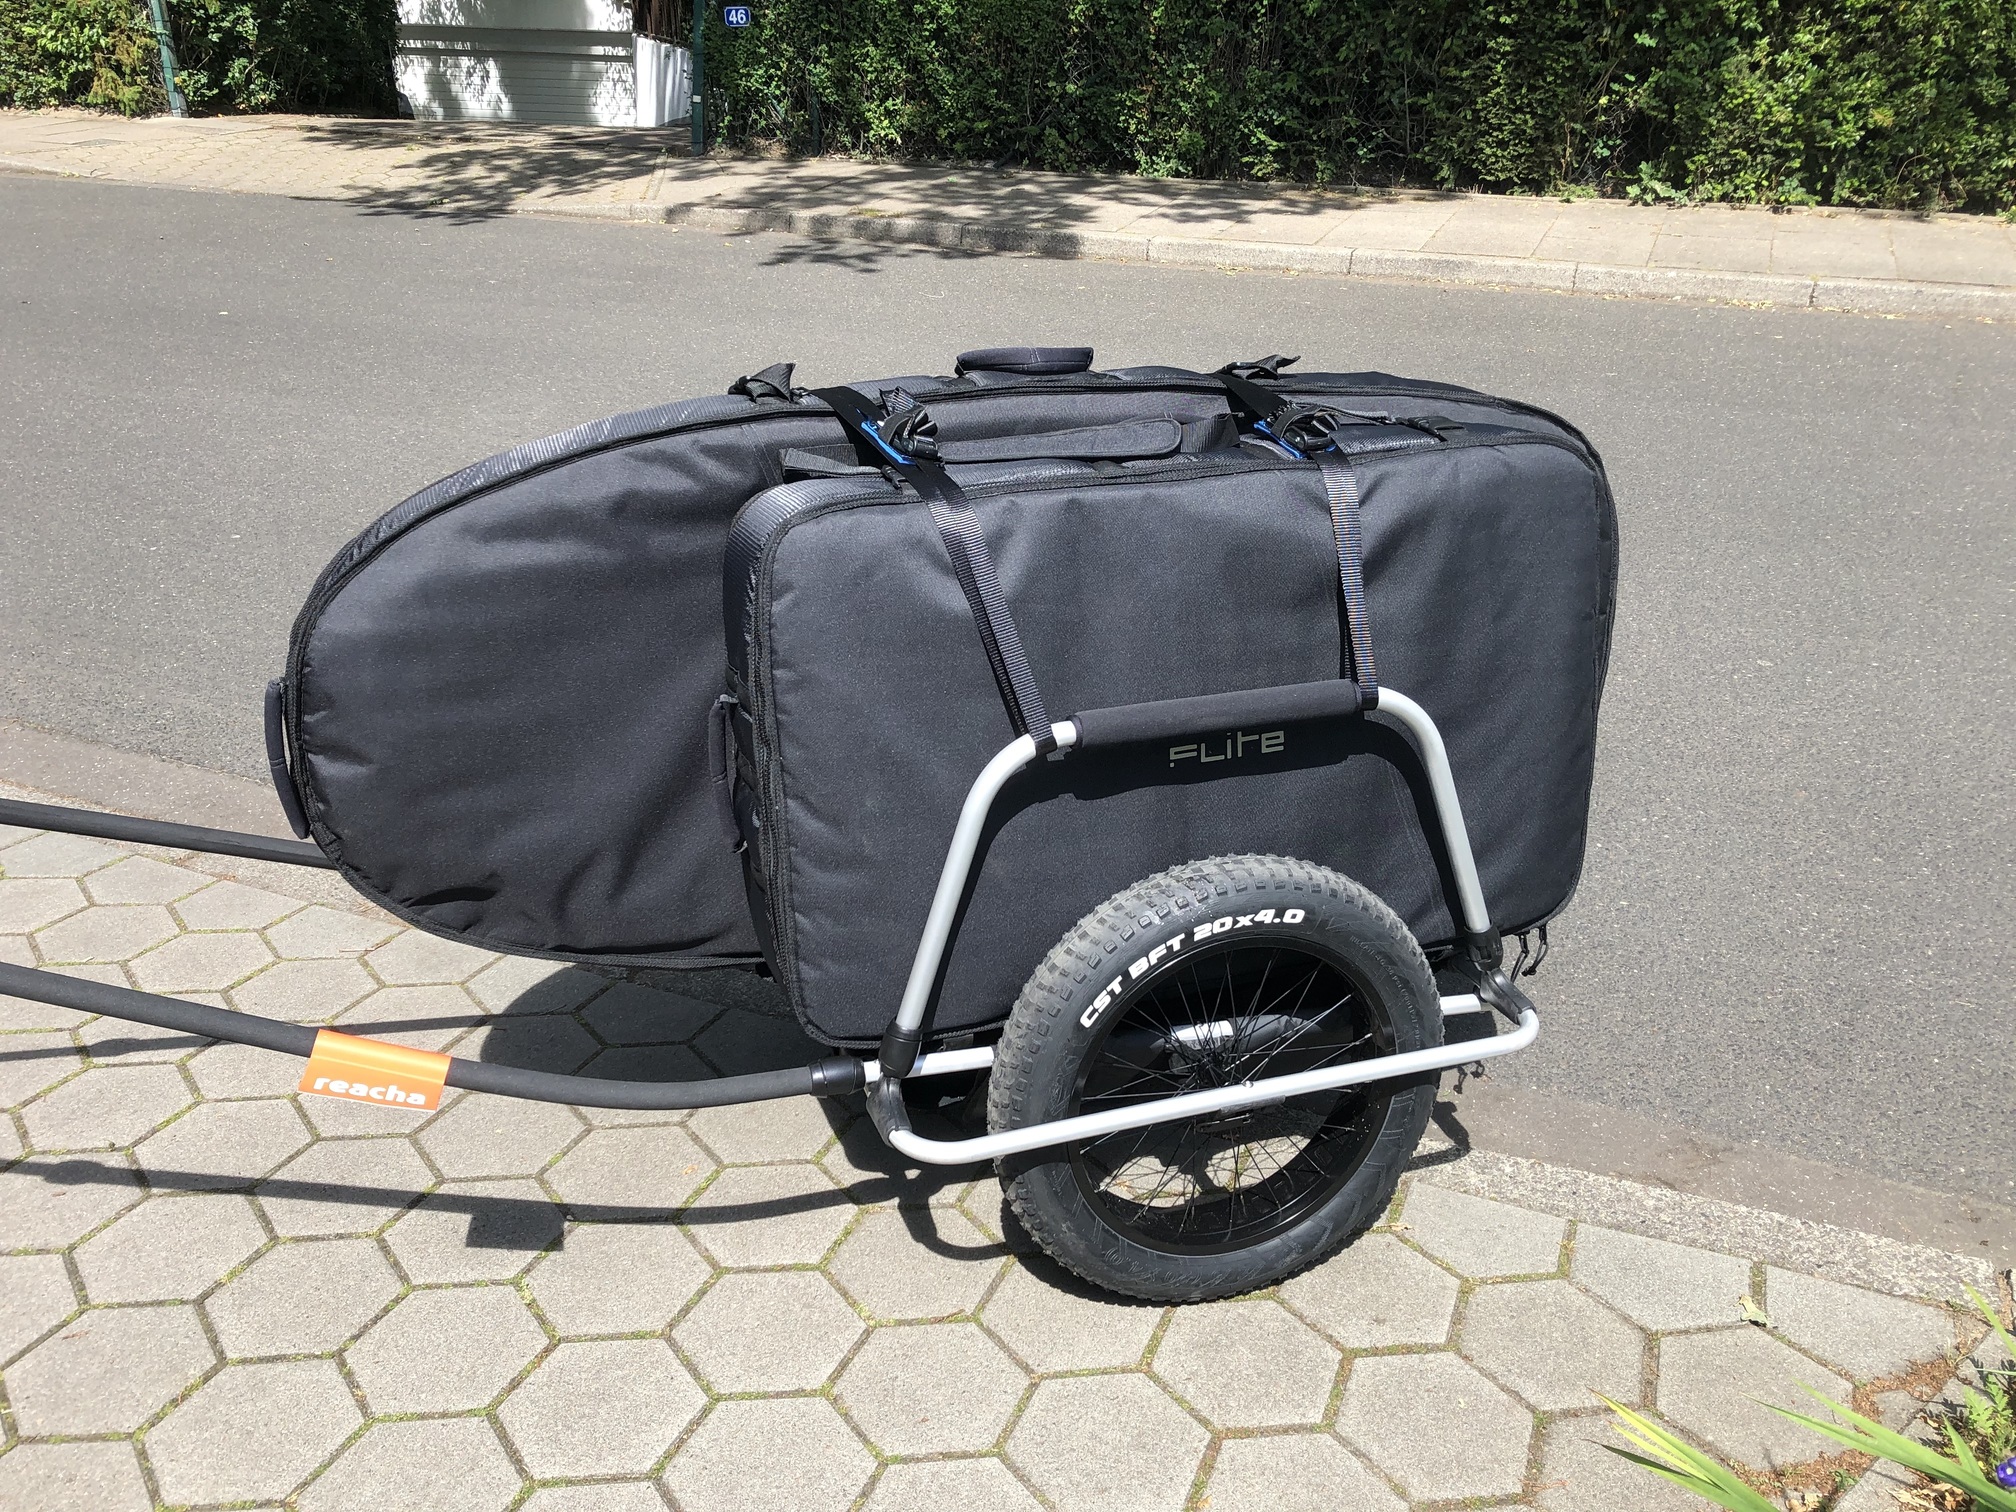 Bike and hand trailer for electric boards - eFoil - eSurfboard